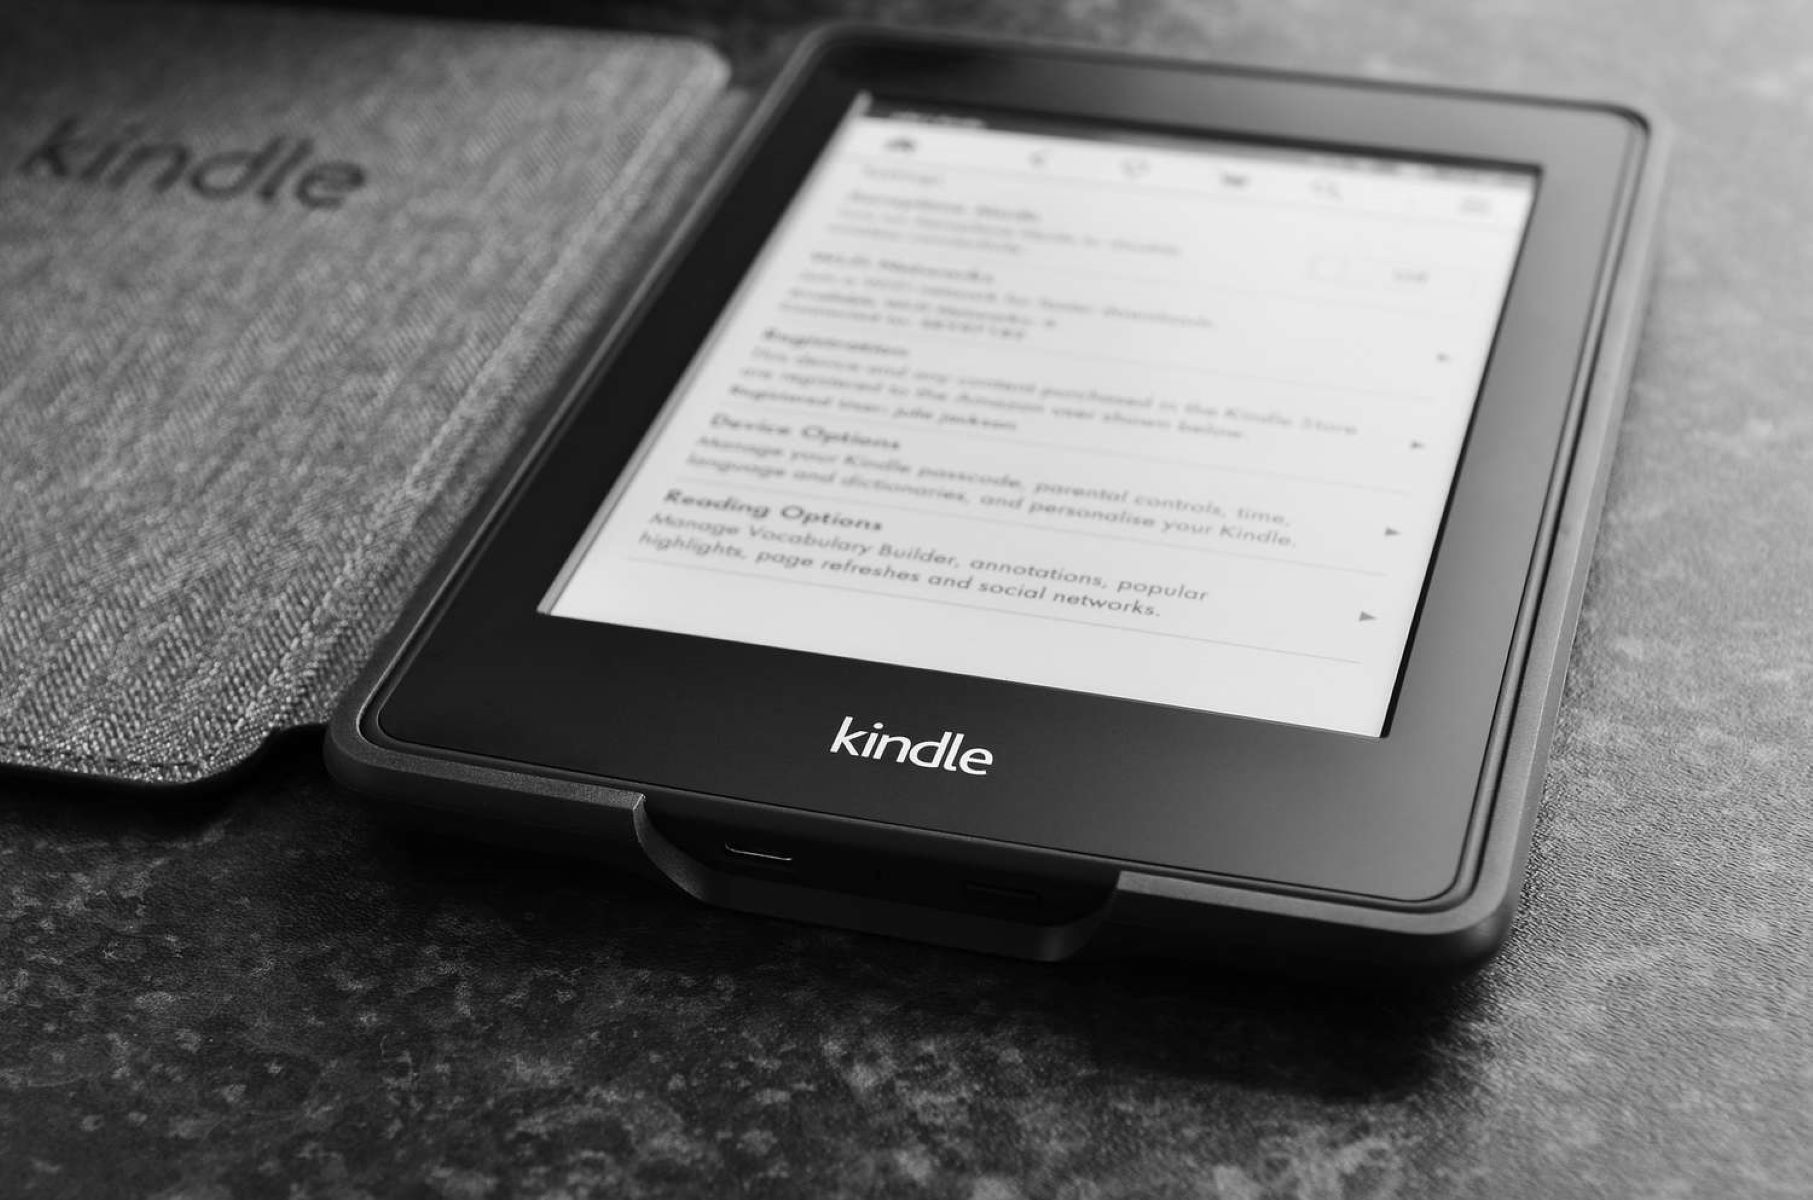 What Is A Kindle?